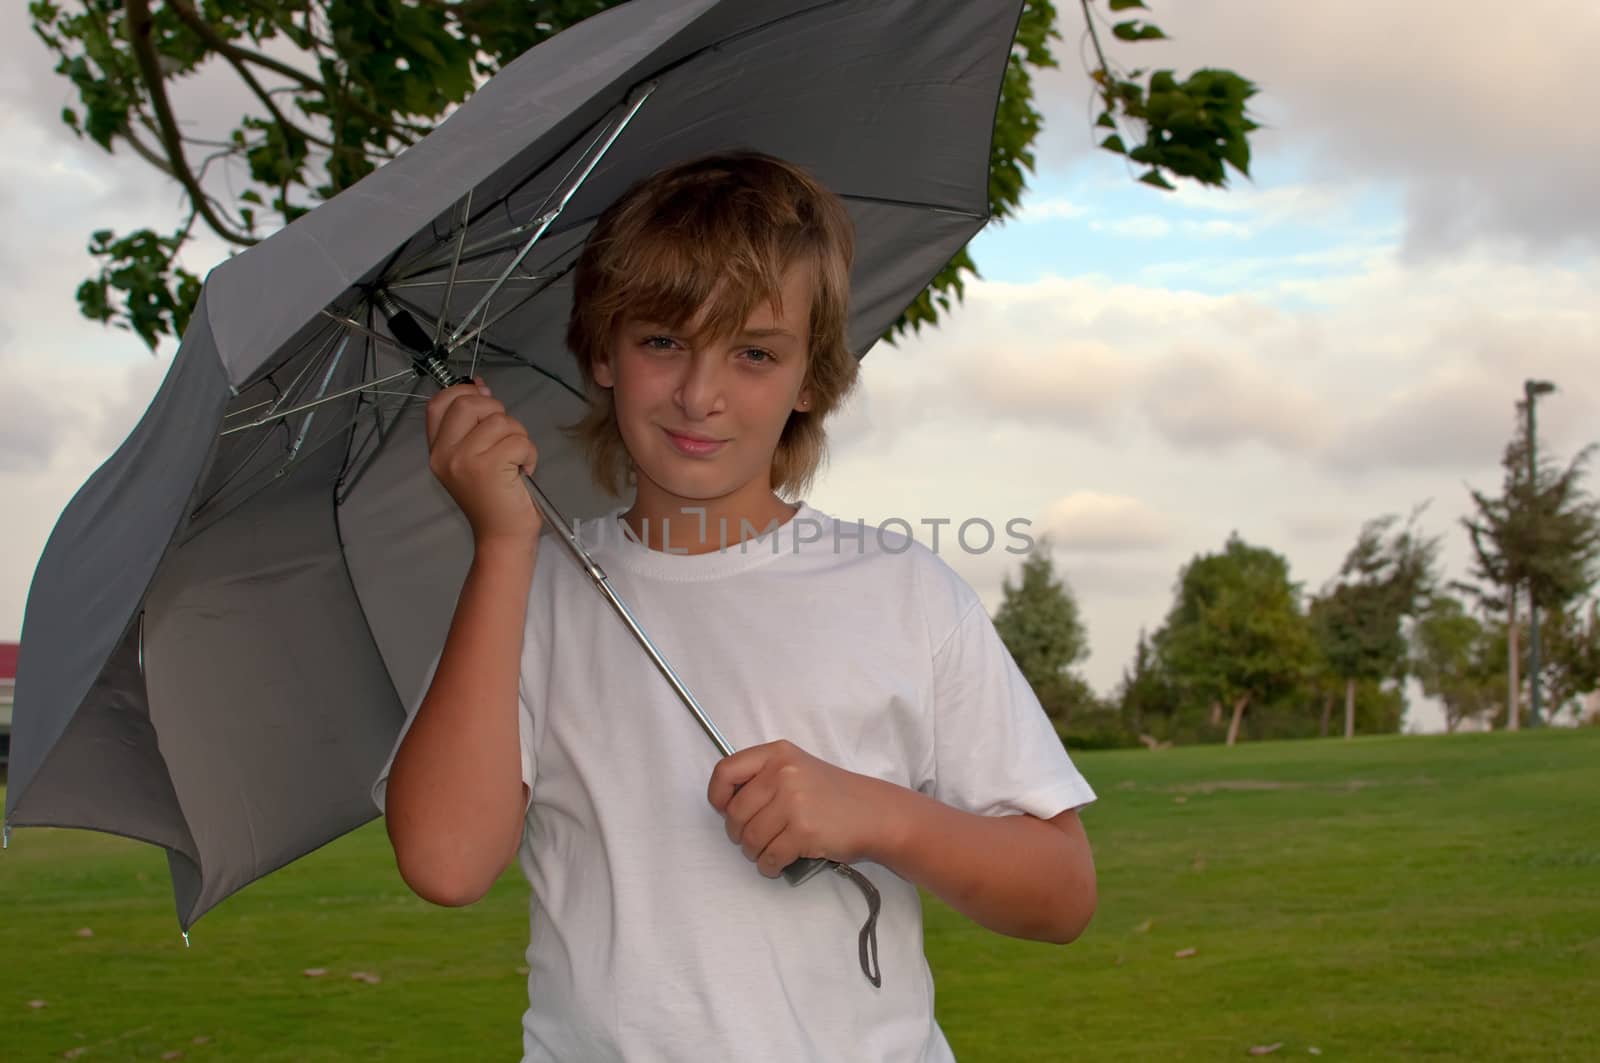 Boy with an umbrella . by LarisaP